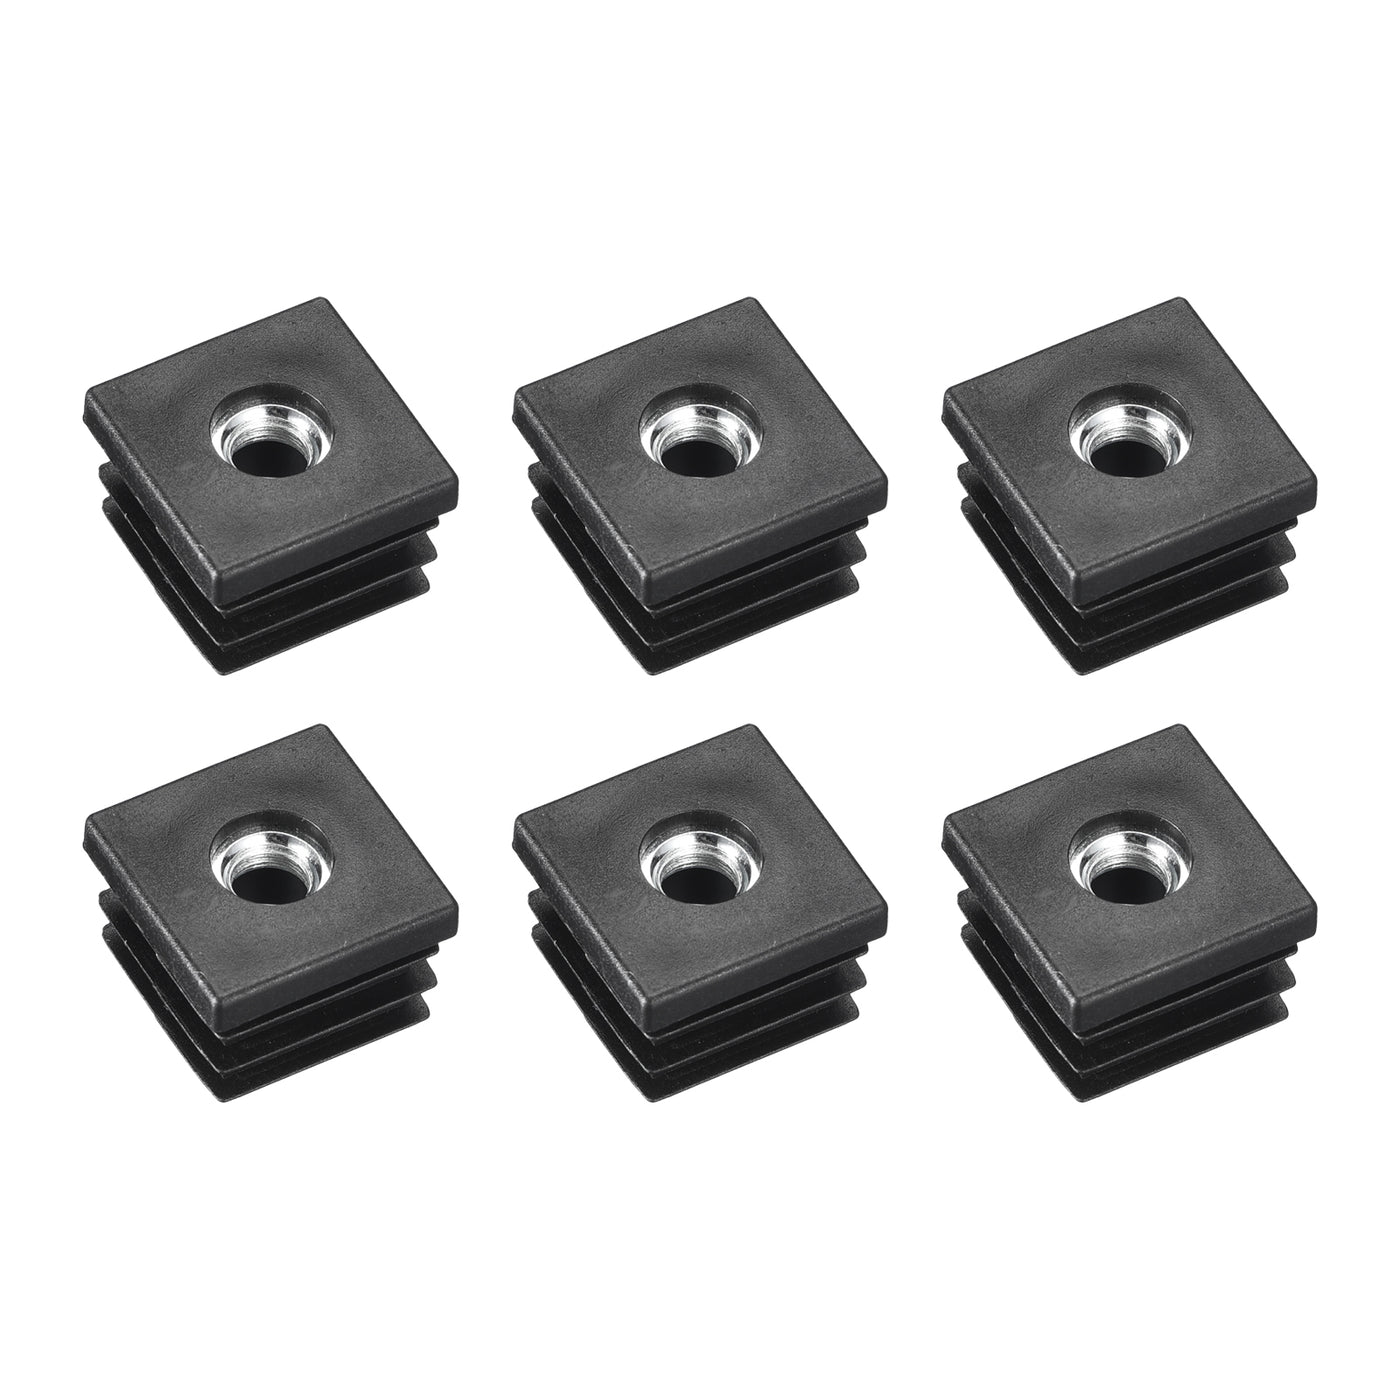 uxcell Uxcell 6Pcs 0.98"x0.98" Caster Insert with Thread, Square M8 Thread for Furniture